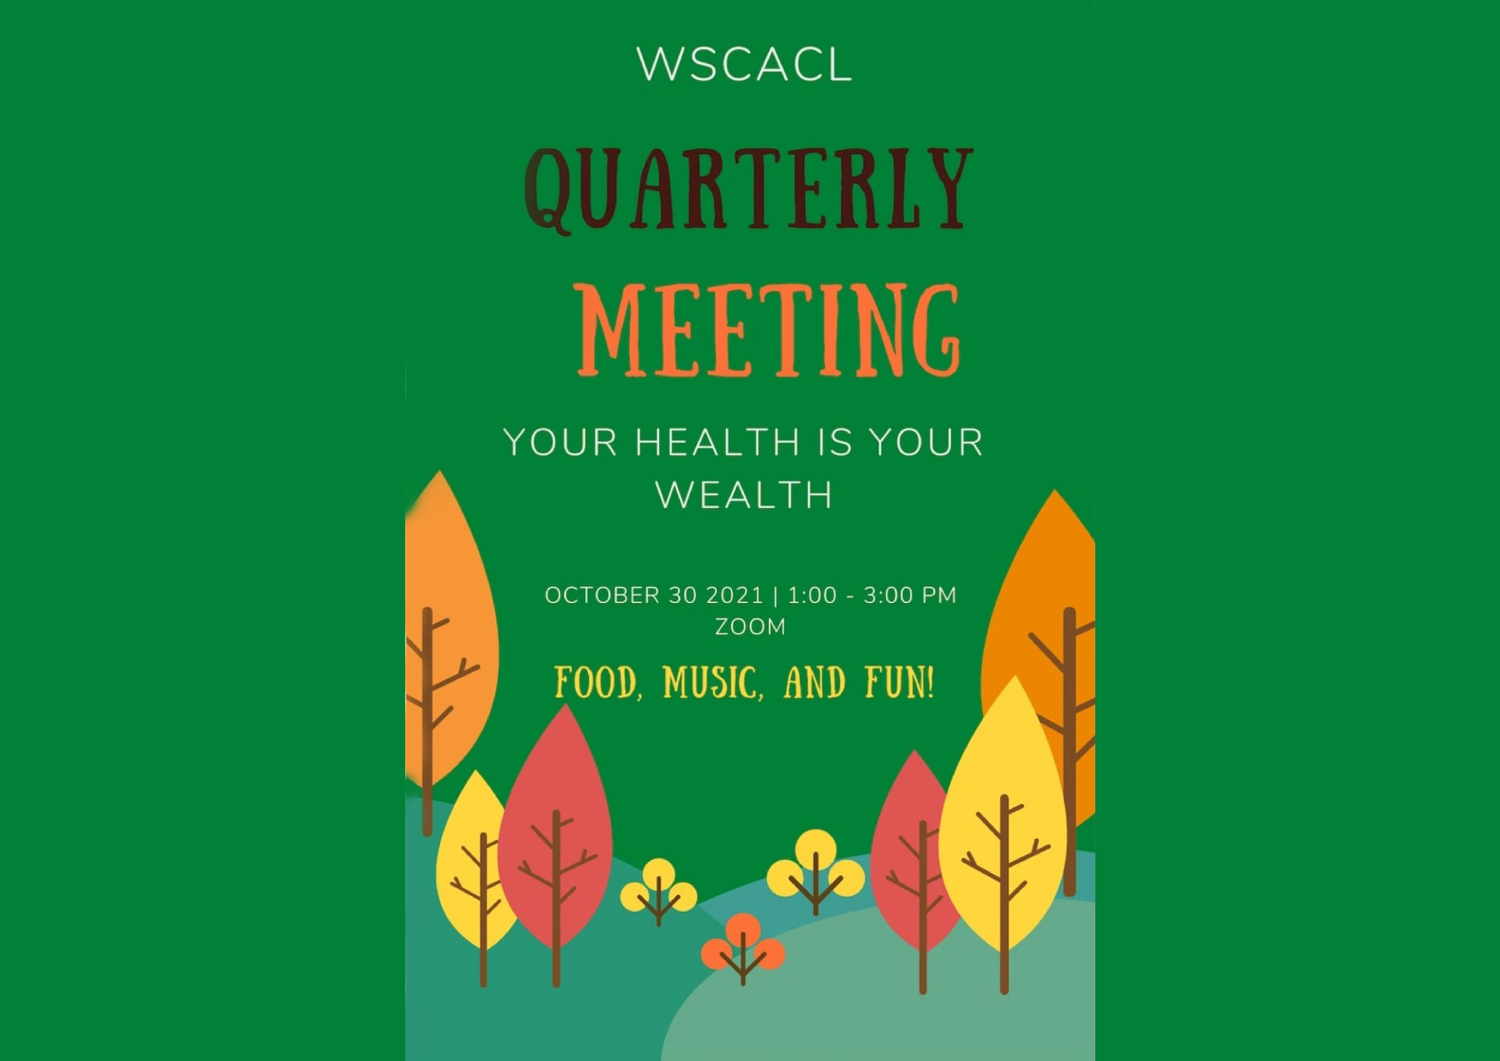 Limited seats, Register NOW for WSCACL Fall Quarterly Meeting Oct. 30th 1-3 PM: Your Health is Your Wealth